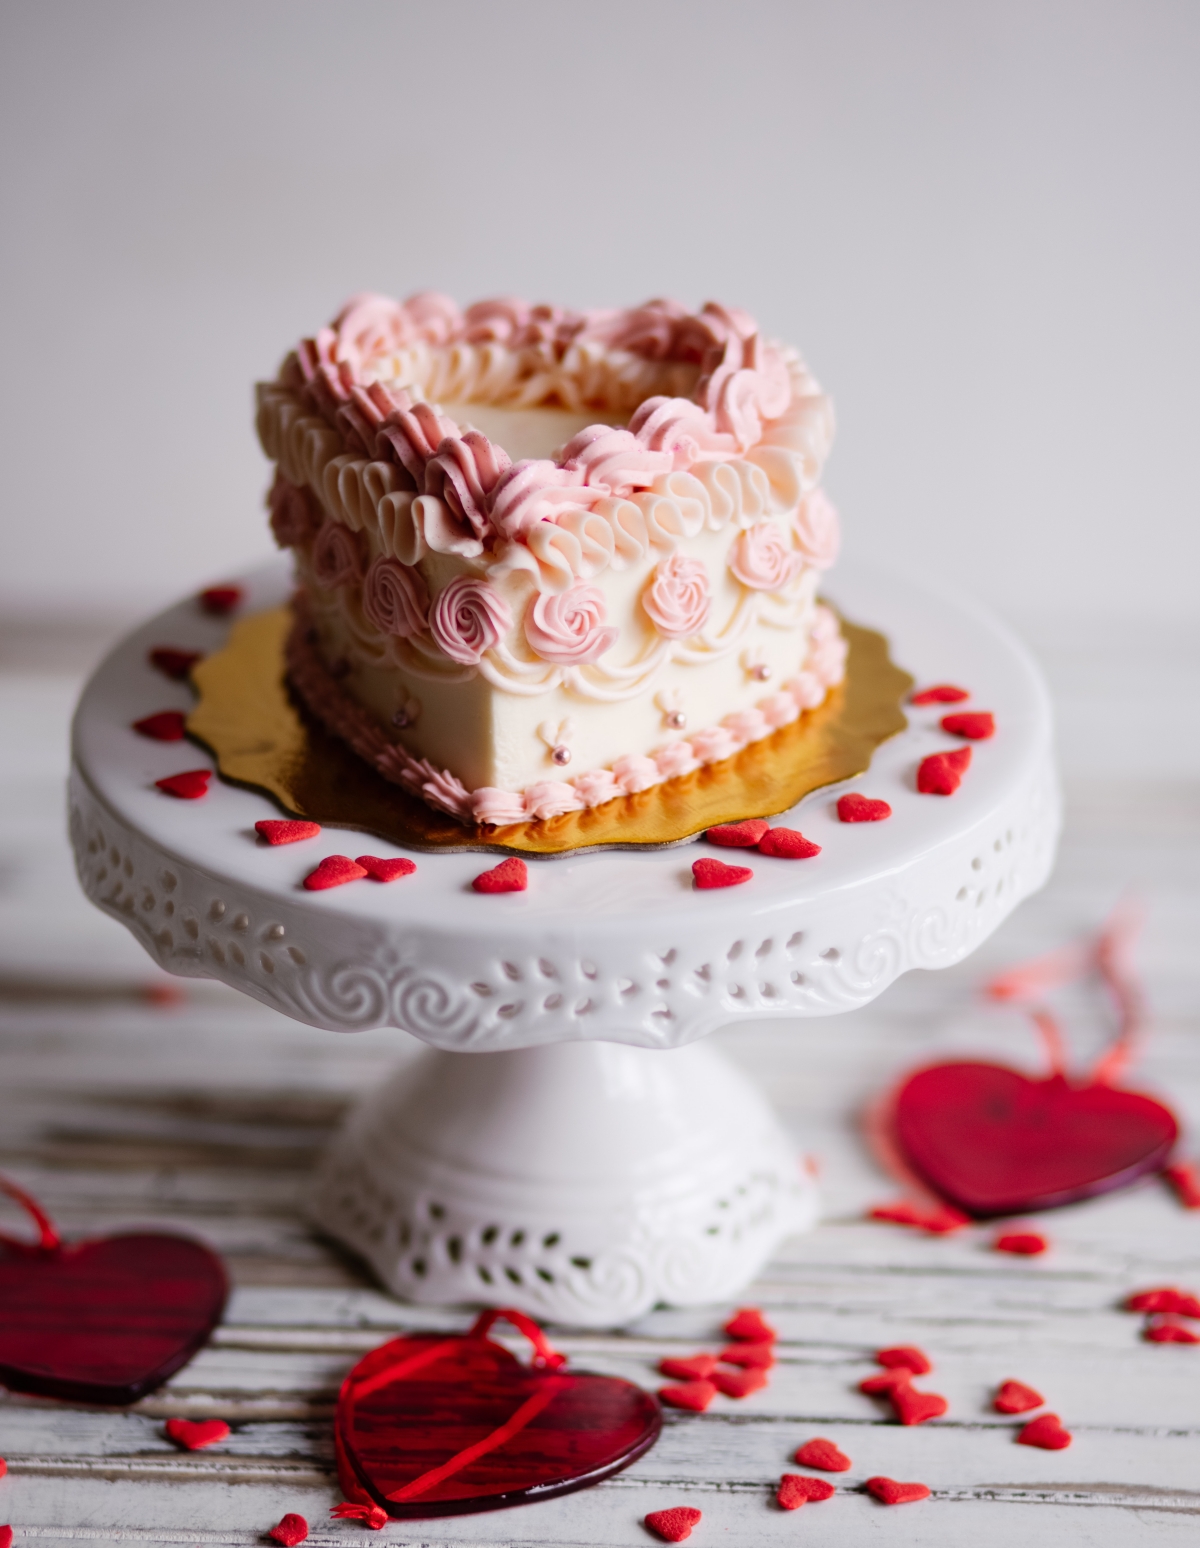 6 Irresistible Heart Cake Recipes to Bake With Love